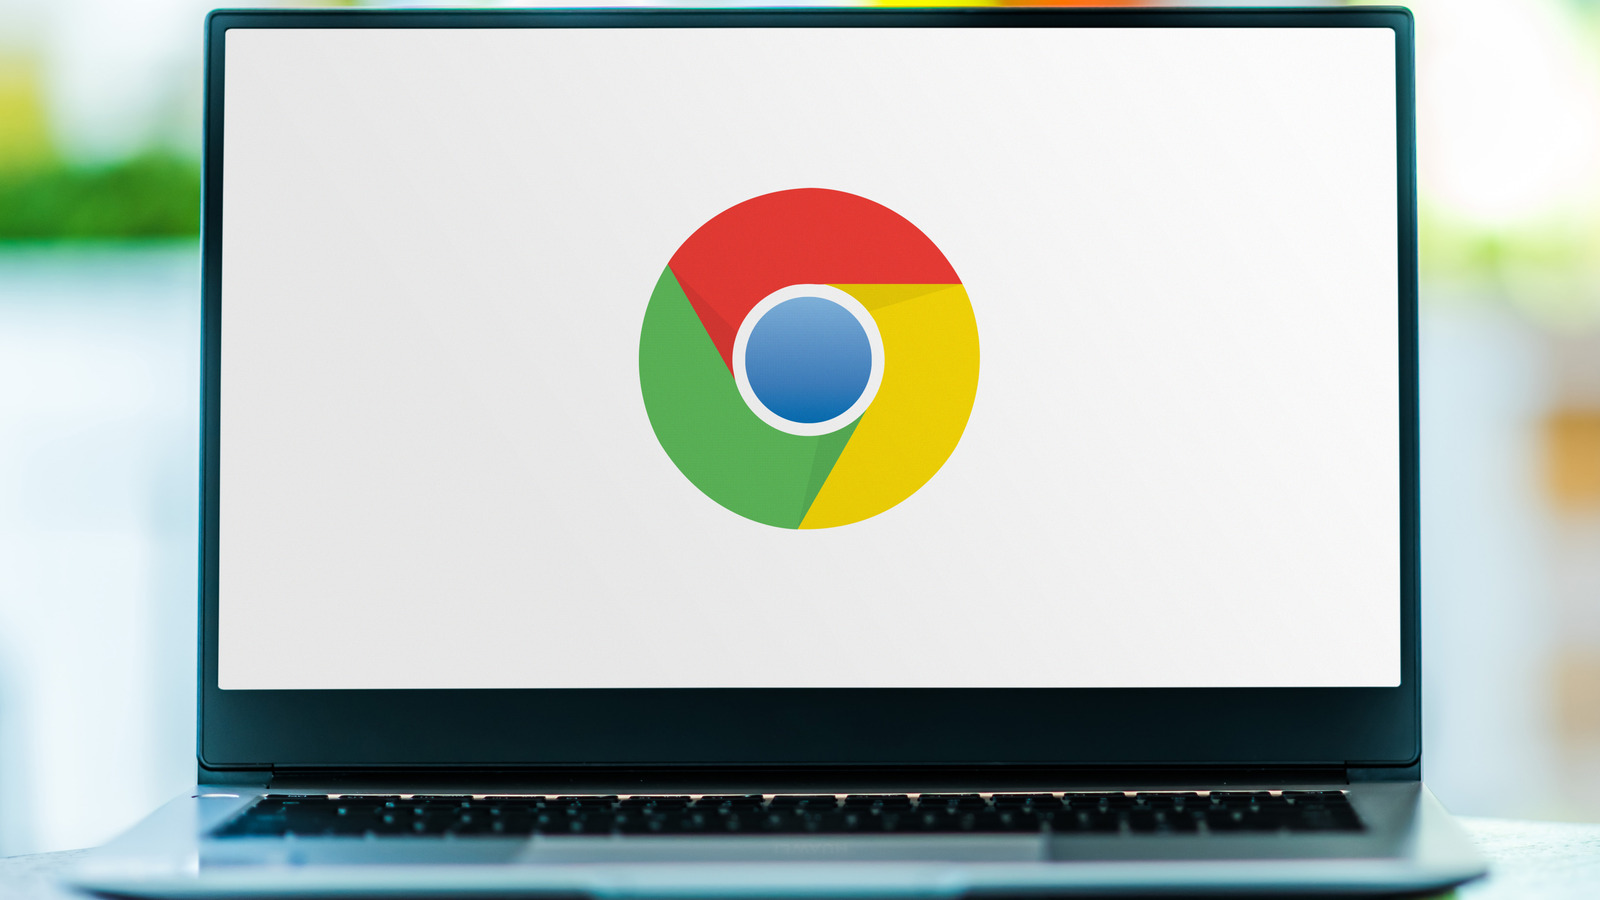 Google's New Privacy Guide Aims To Make Chrome Settings Simple